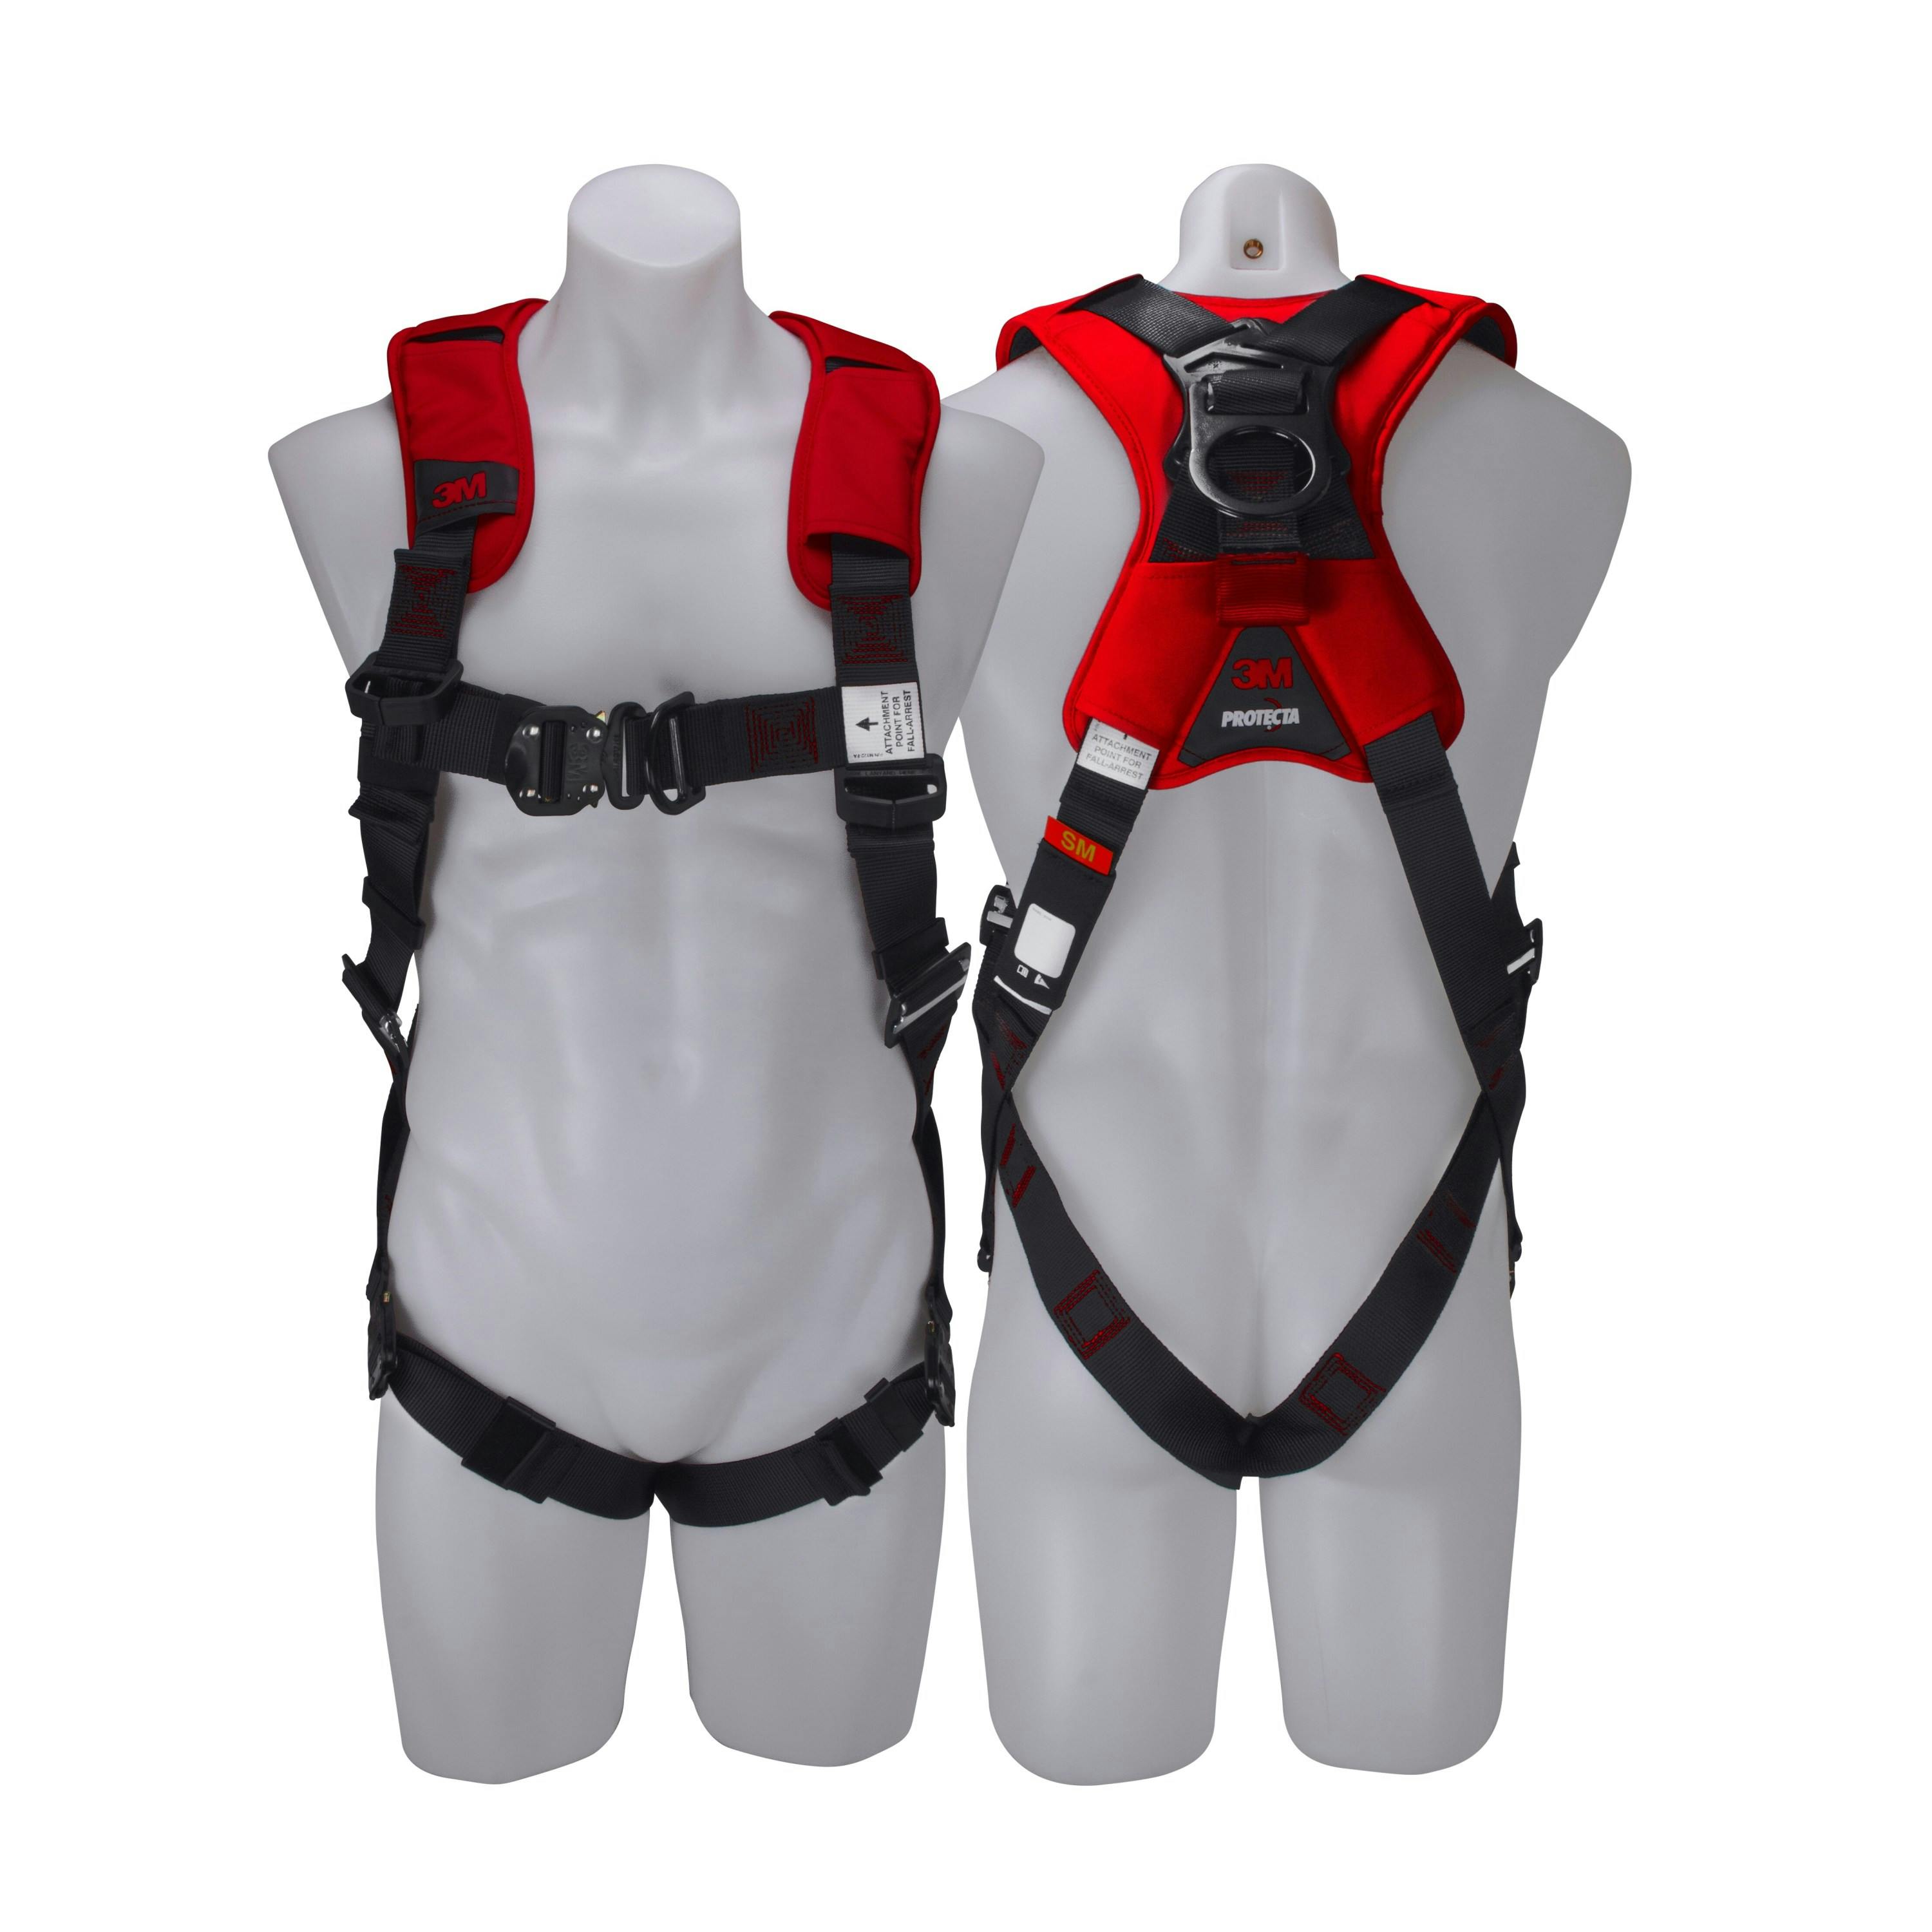 3M™ PROTECTA® X Riggers Harness with Padding 1161679, Red and Black, Extra Large, 1 EA/Case